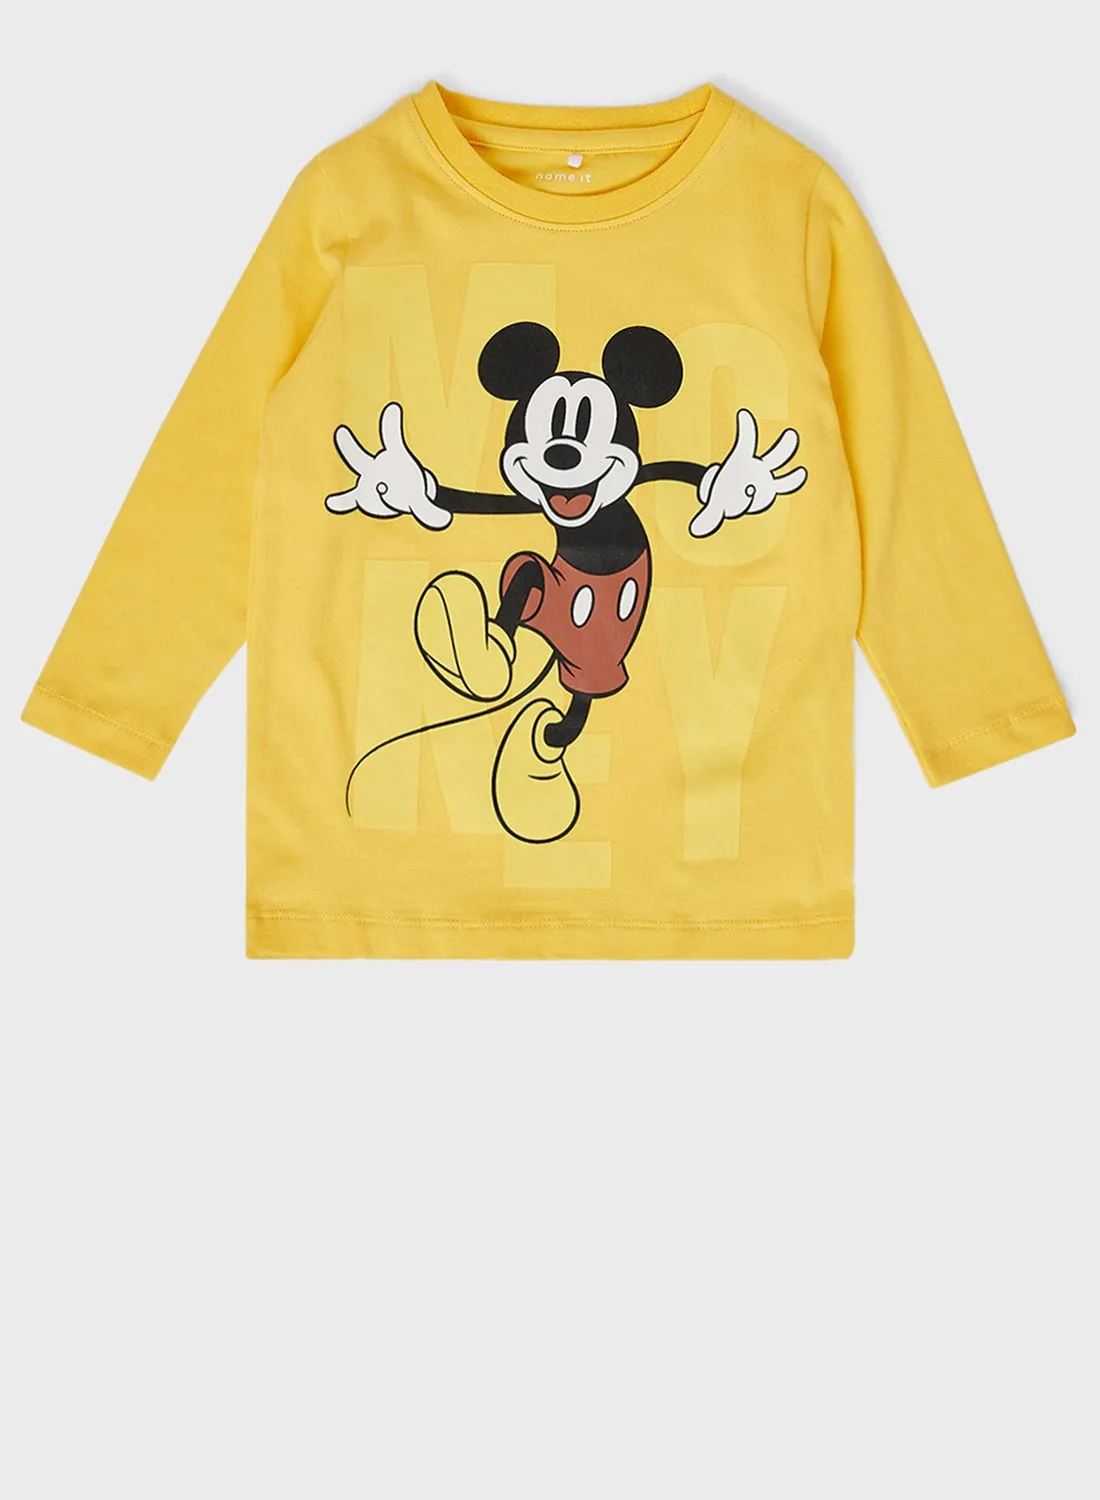 NAME IT Kids Mickey Mouse T-Shirt